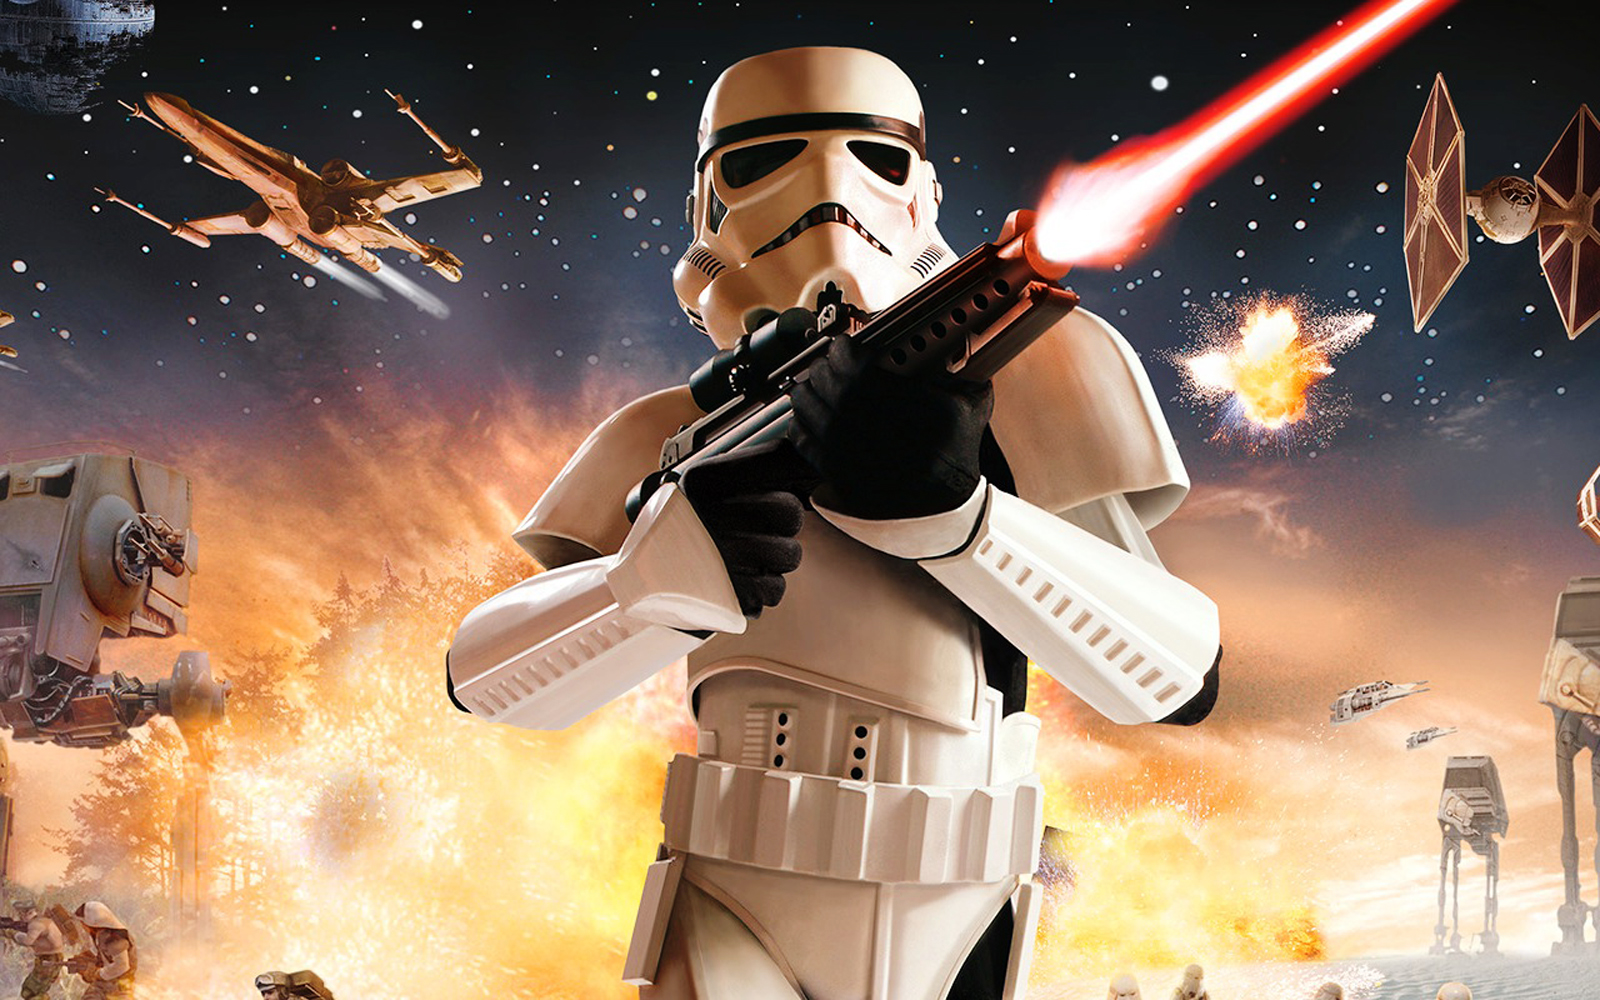 Stormtroopers Star Wars HD Wallpaper Image To